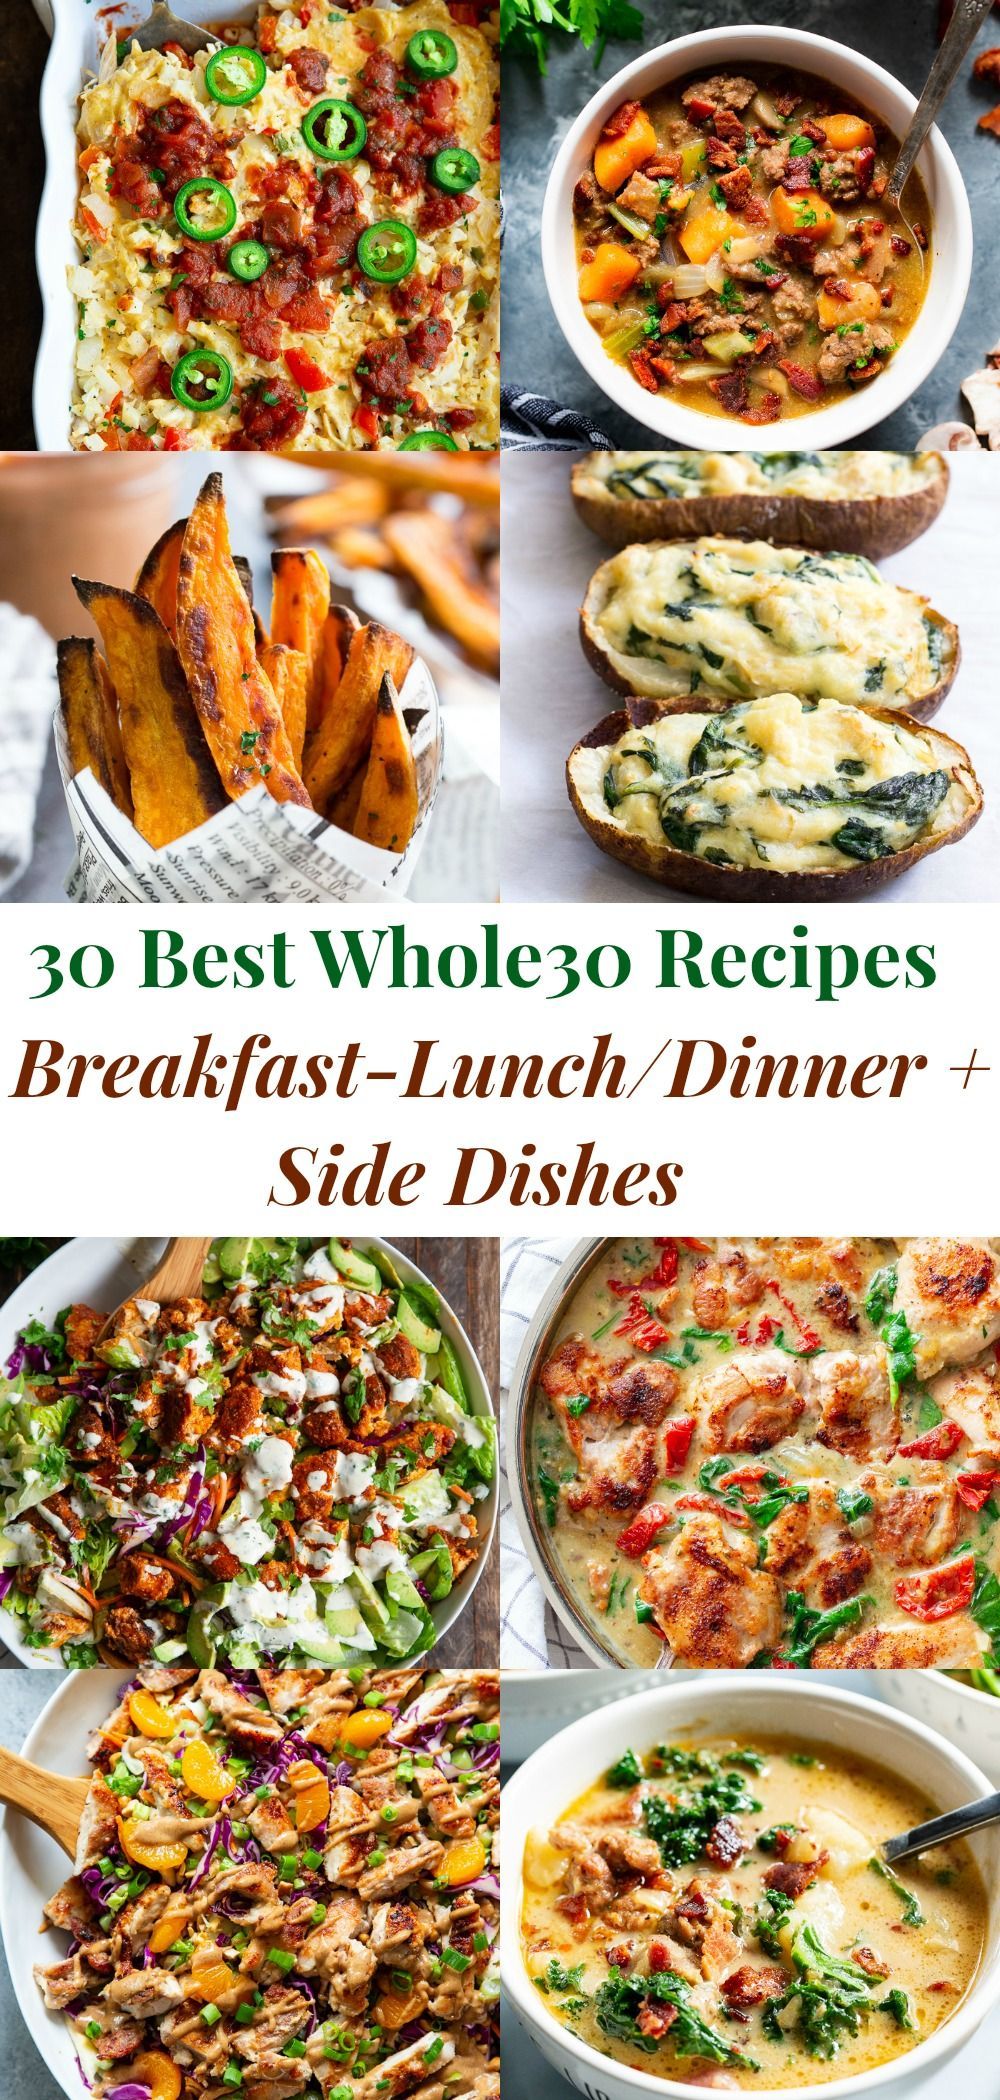 30 Best Whole30 Recipes -   15 healthy recipes Clean dinner ideas